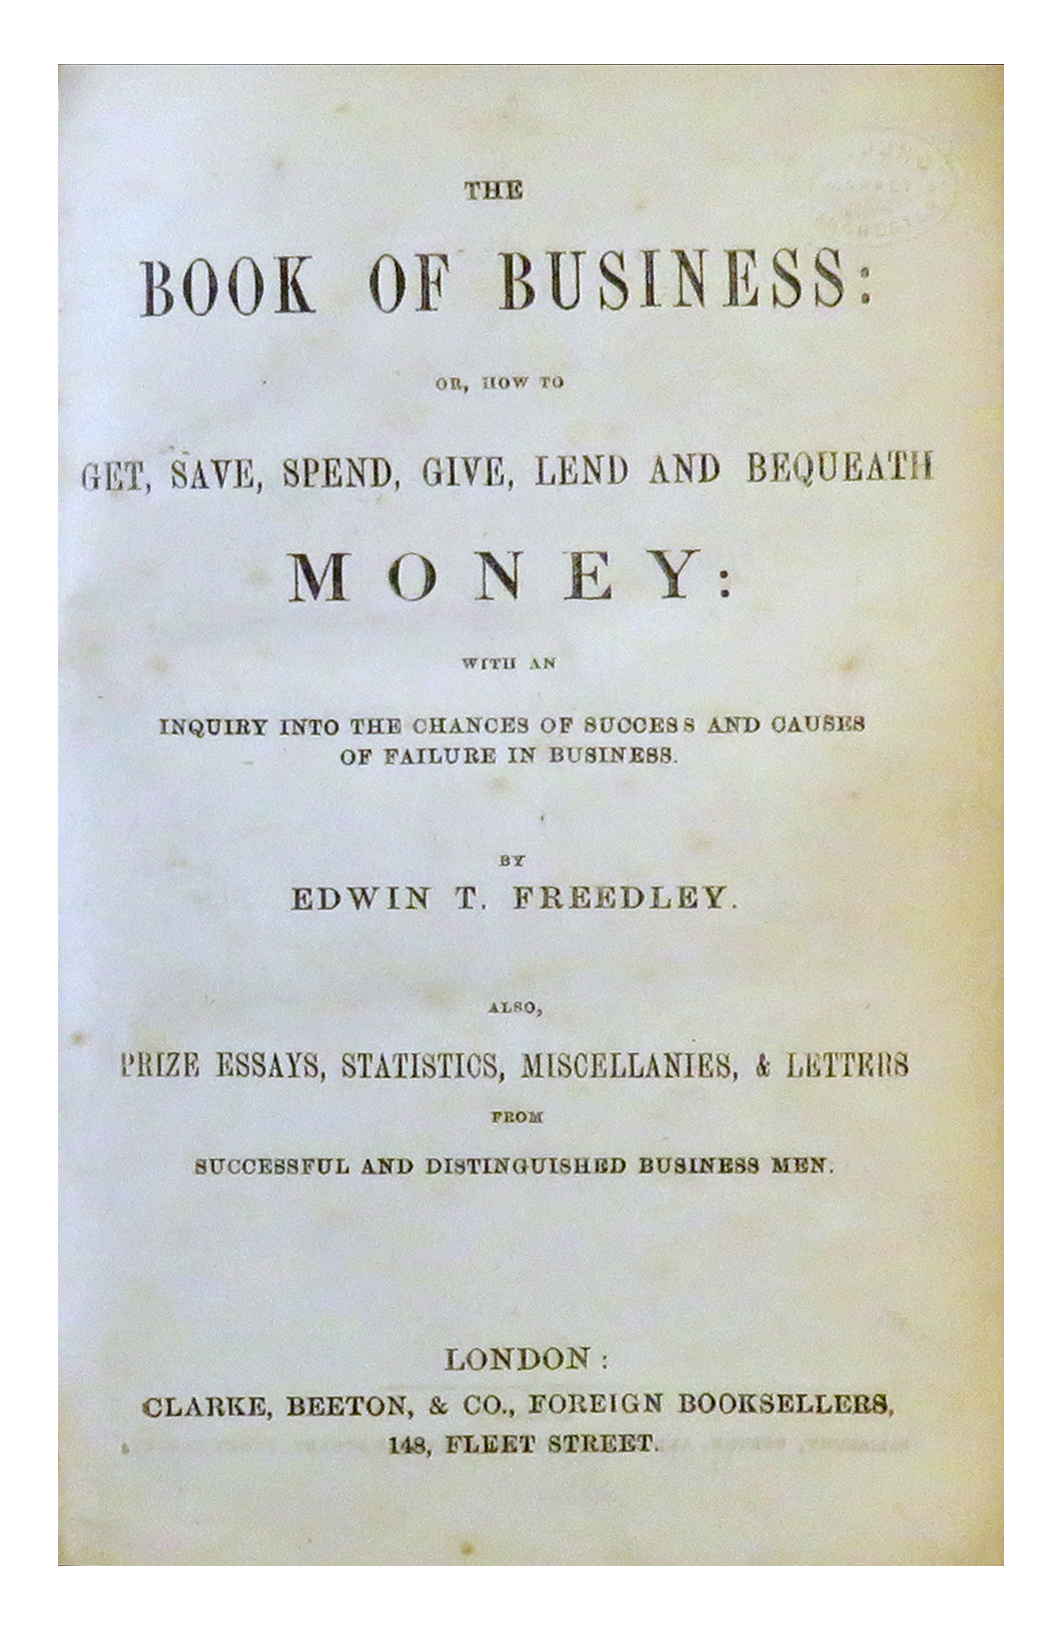 The Book of Business: or, How to Get, Save, Spend, Give, Lend and Bequeath Money: with an Inquiry into the Chances of Success and Causes of Failure in Business.